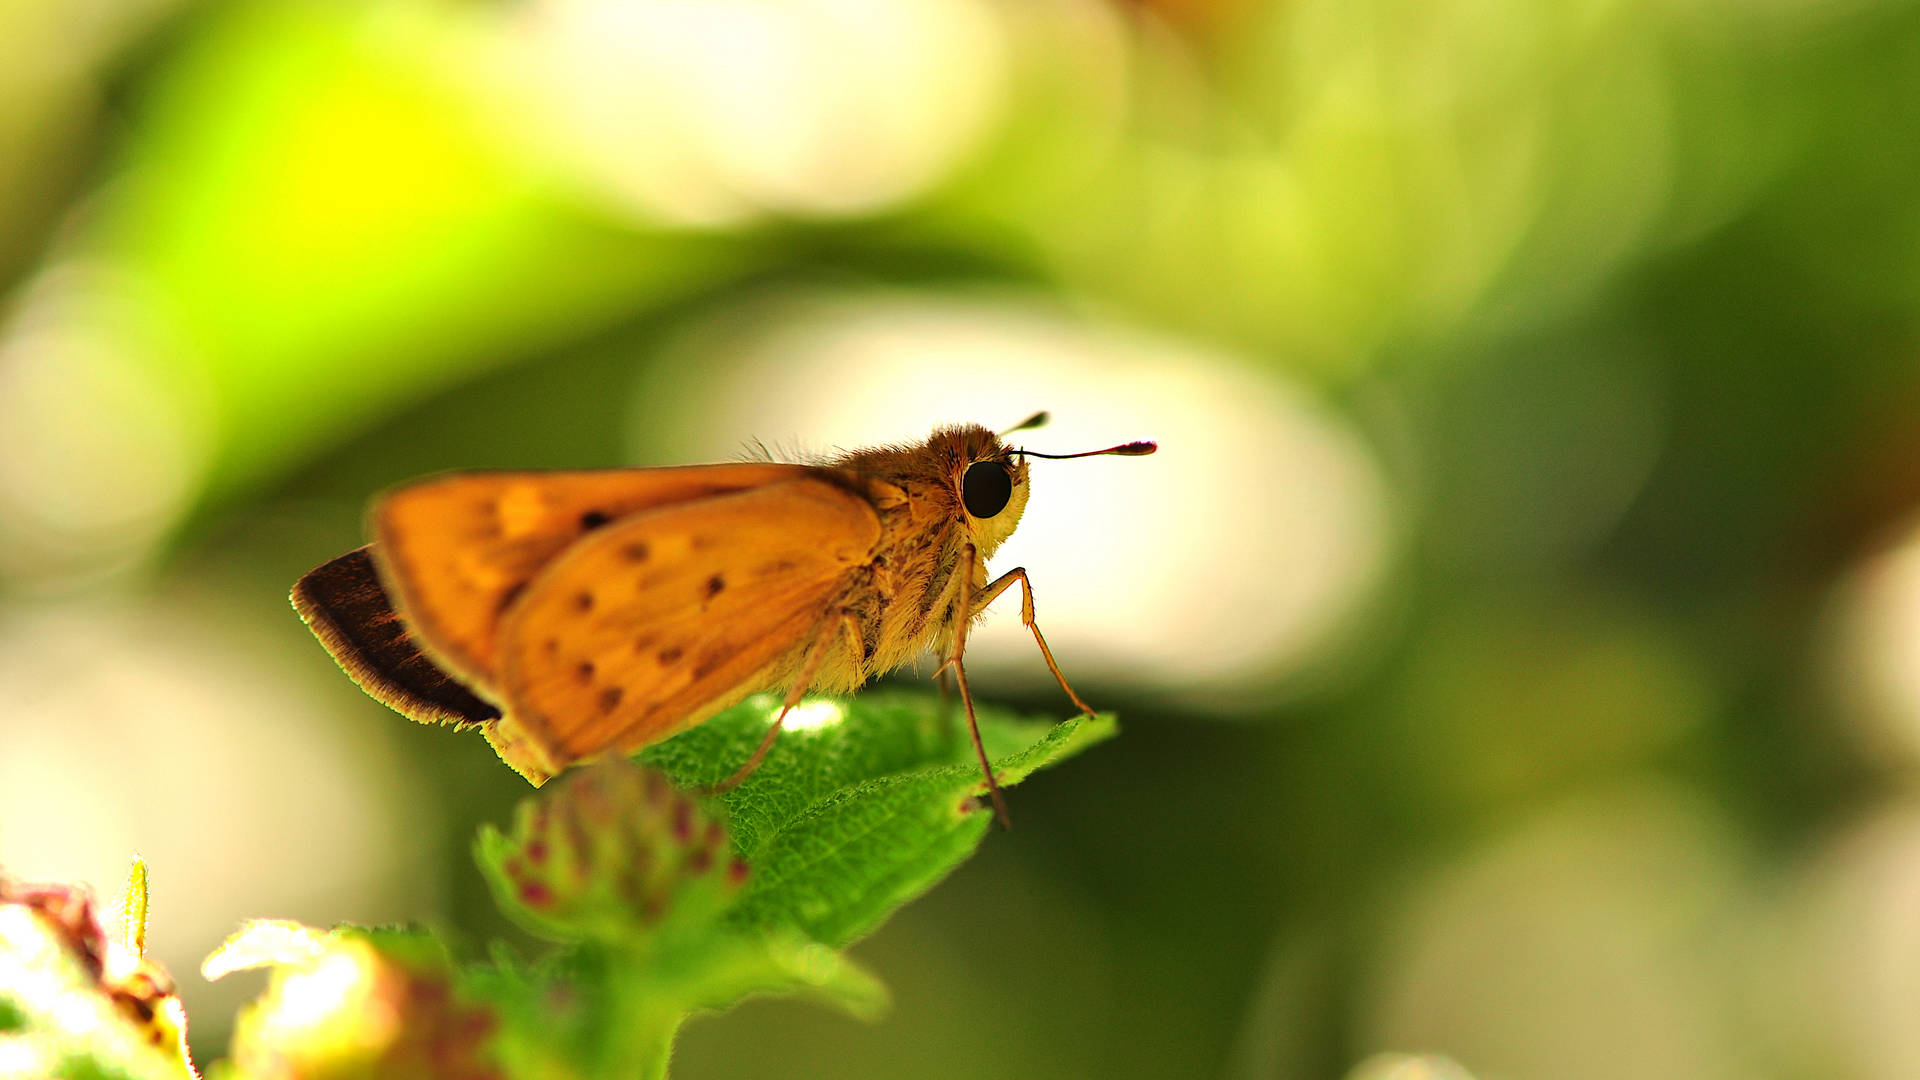 Brown Moth On Green Leaf In Close Up Photography During Daytime Background